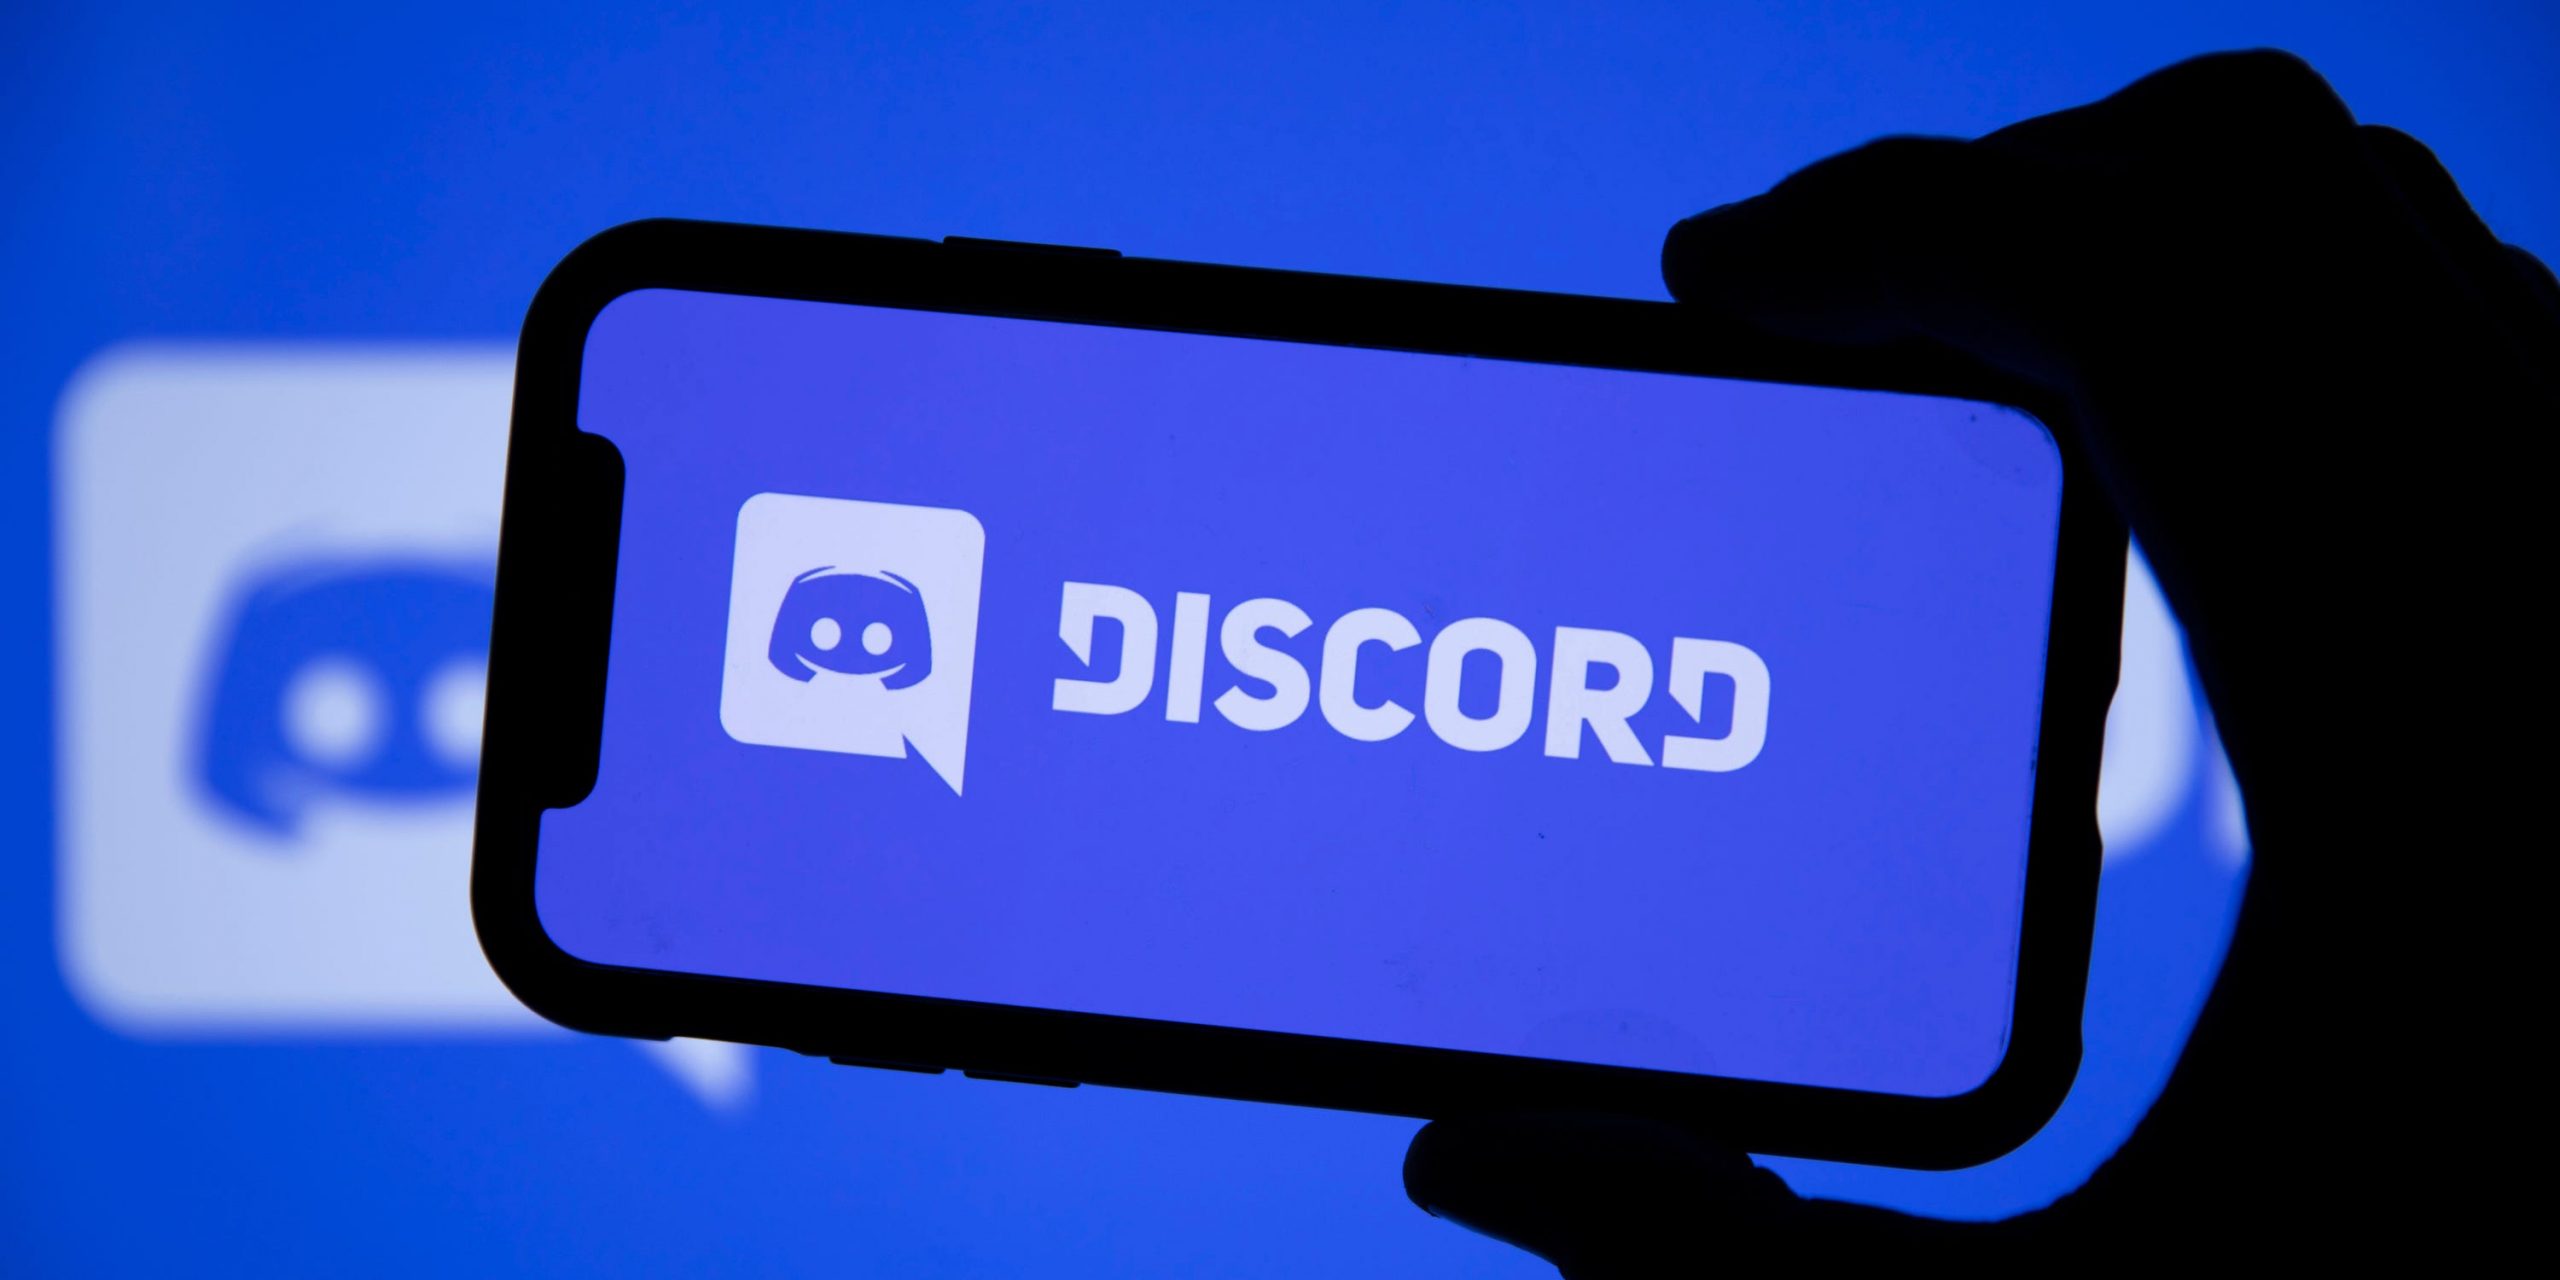 The Discord logo displayed on an iPhone.